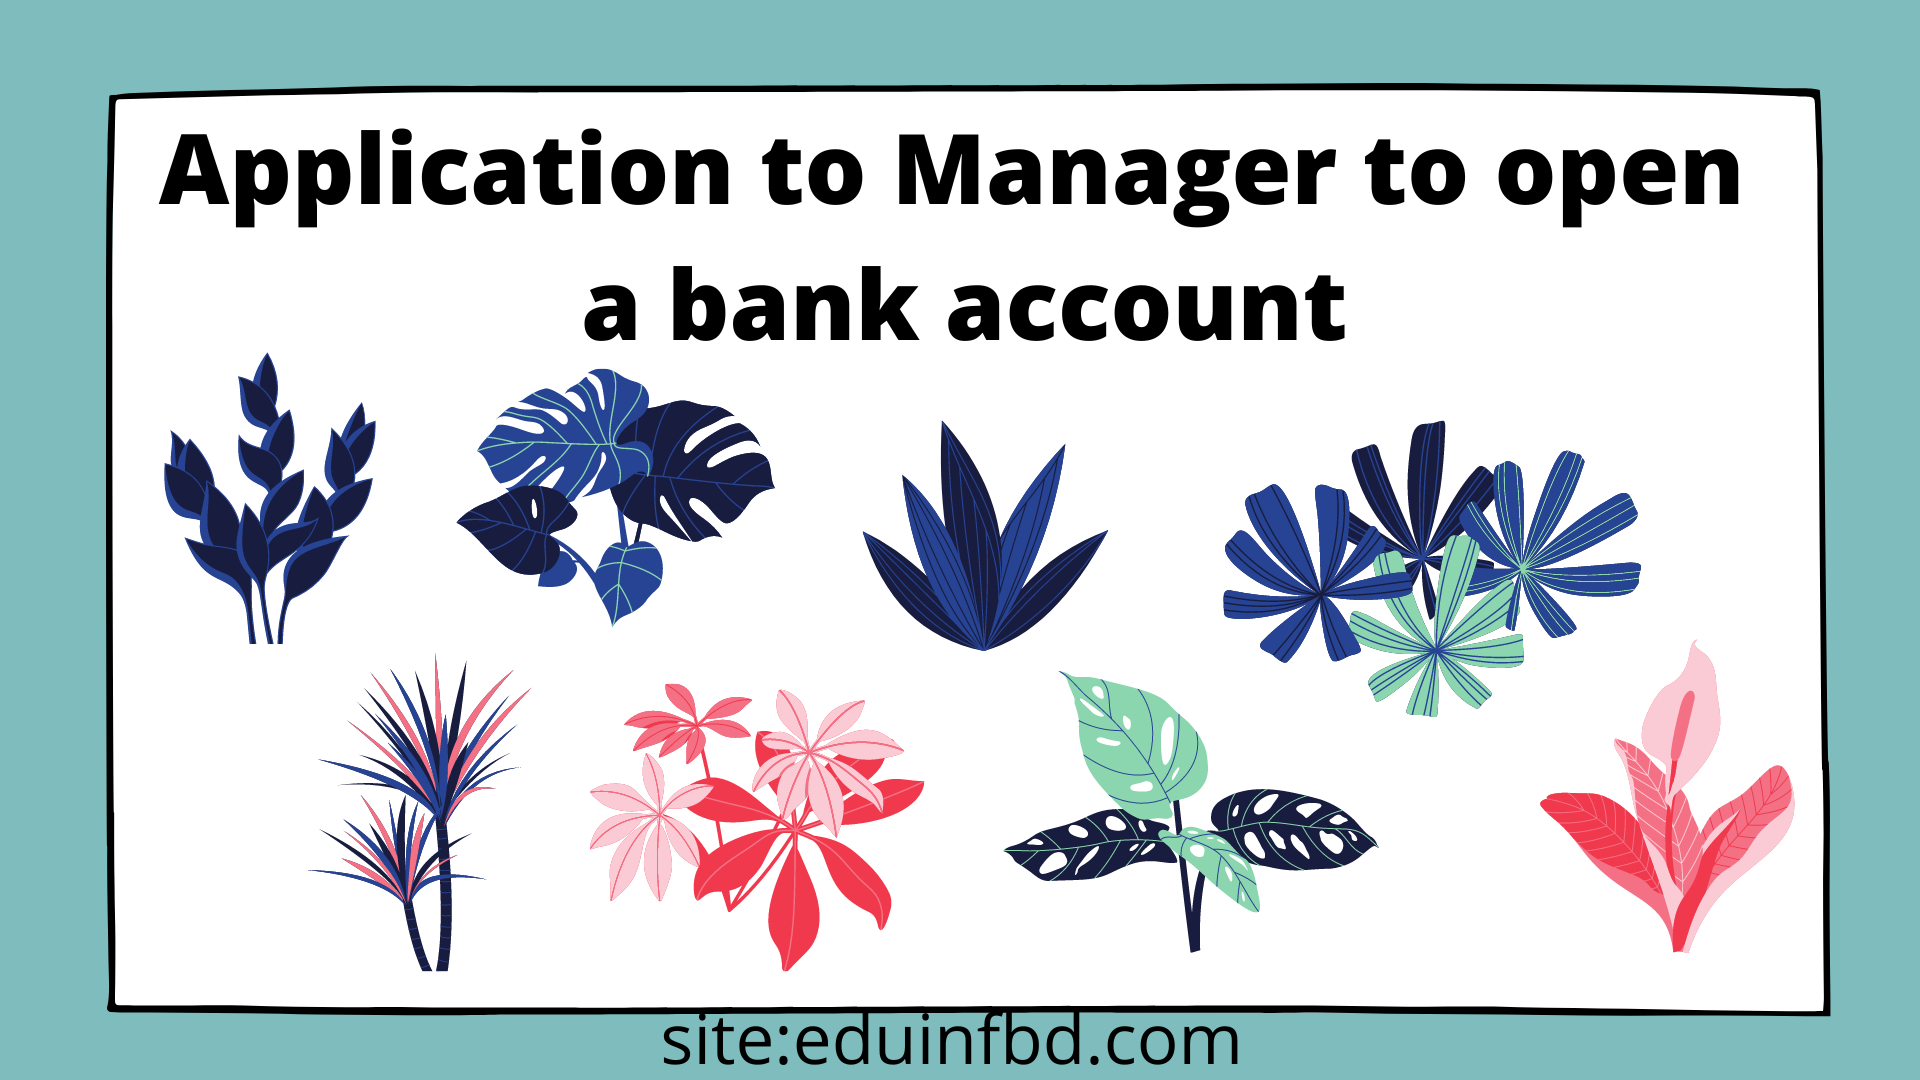 Application to Manager to open a bank account